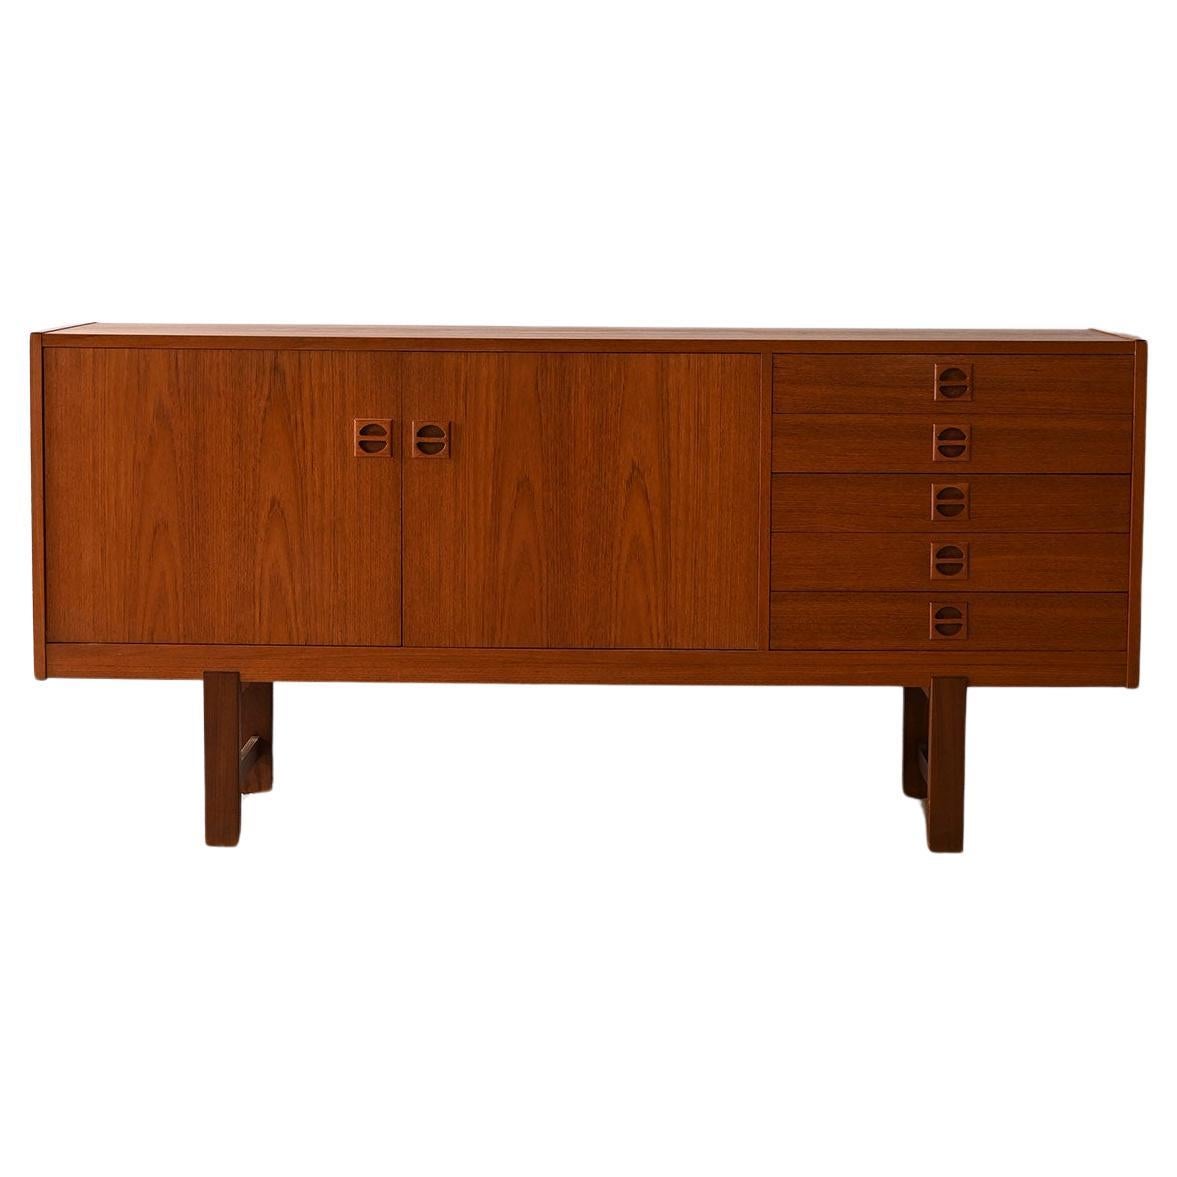 1900s teak sideboard with drawers and doors